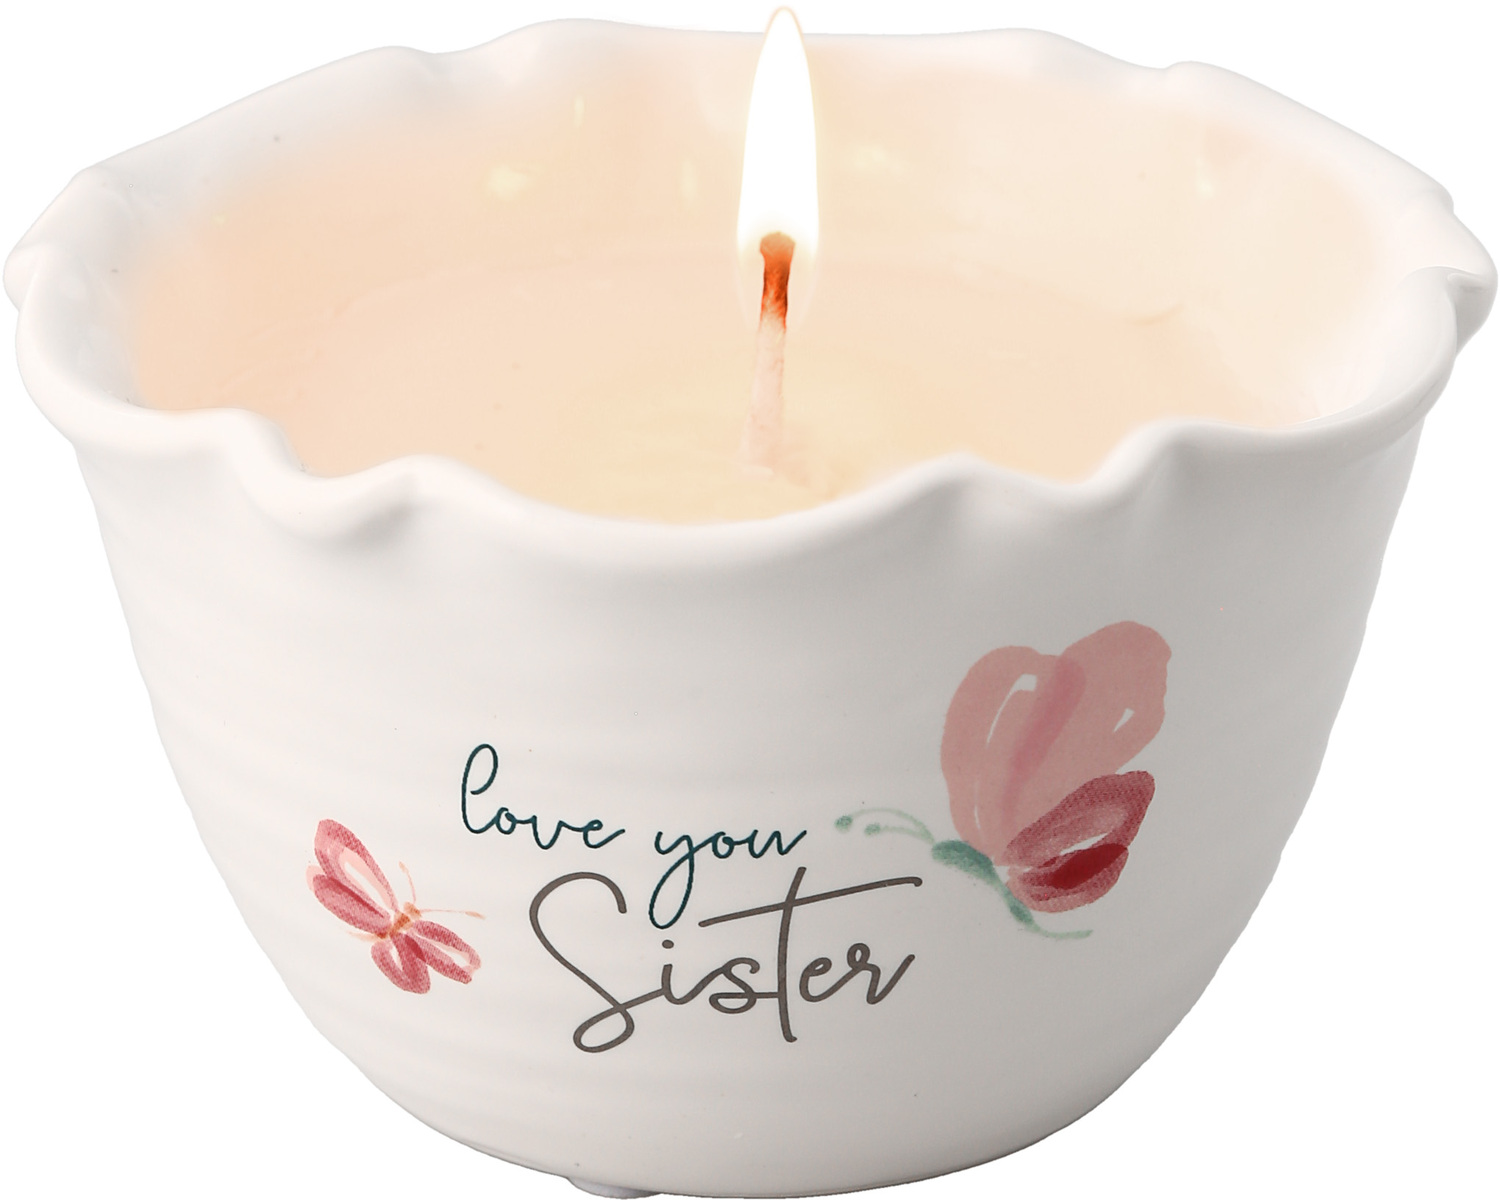 Sister by Rosy Heart - Sister - 9 oz - 100% Soy Wax Candle
Scent: Tranquility